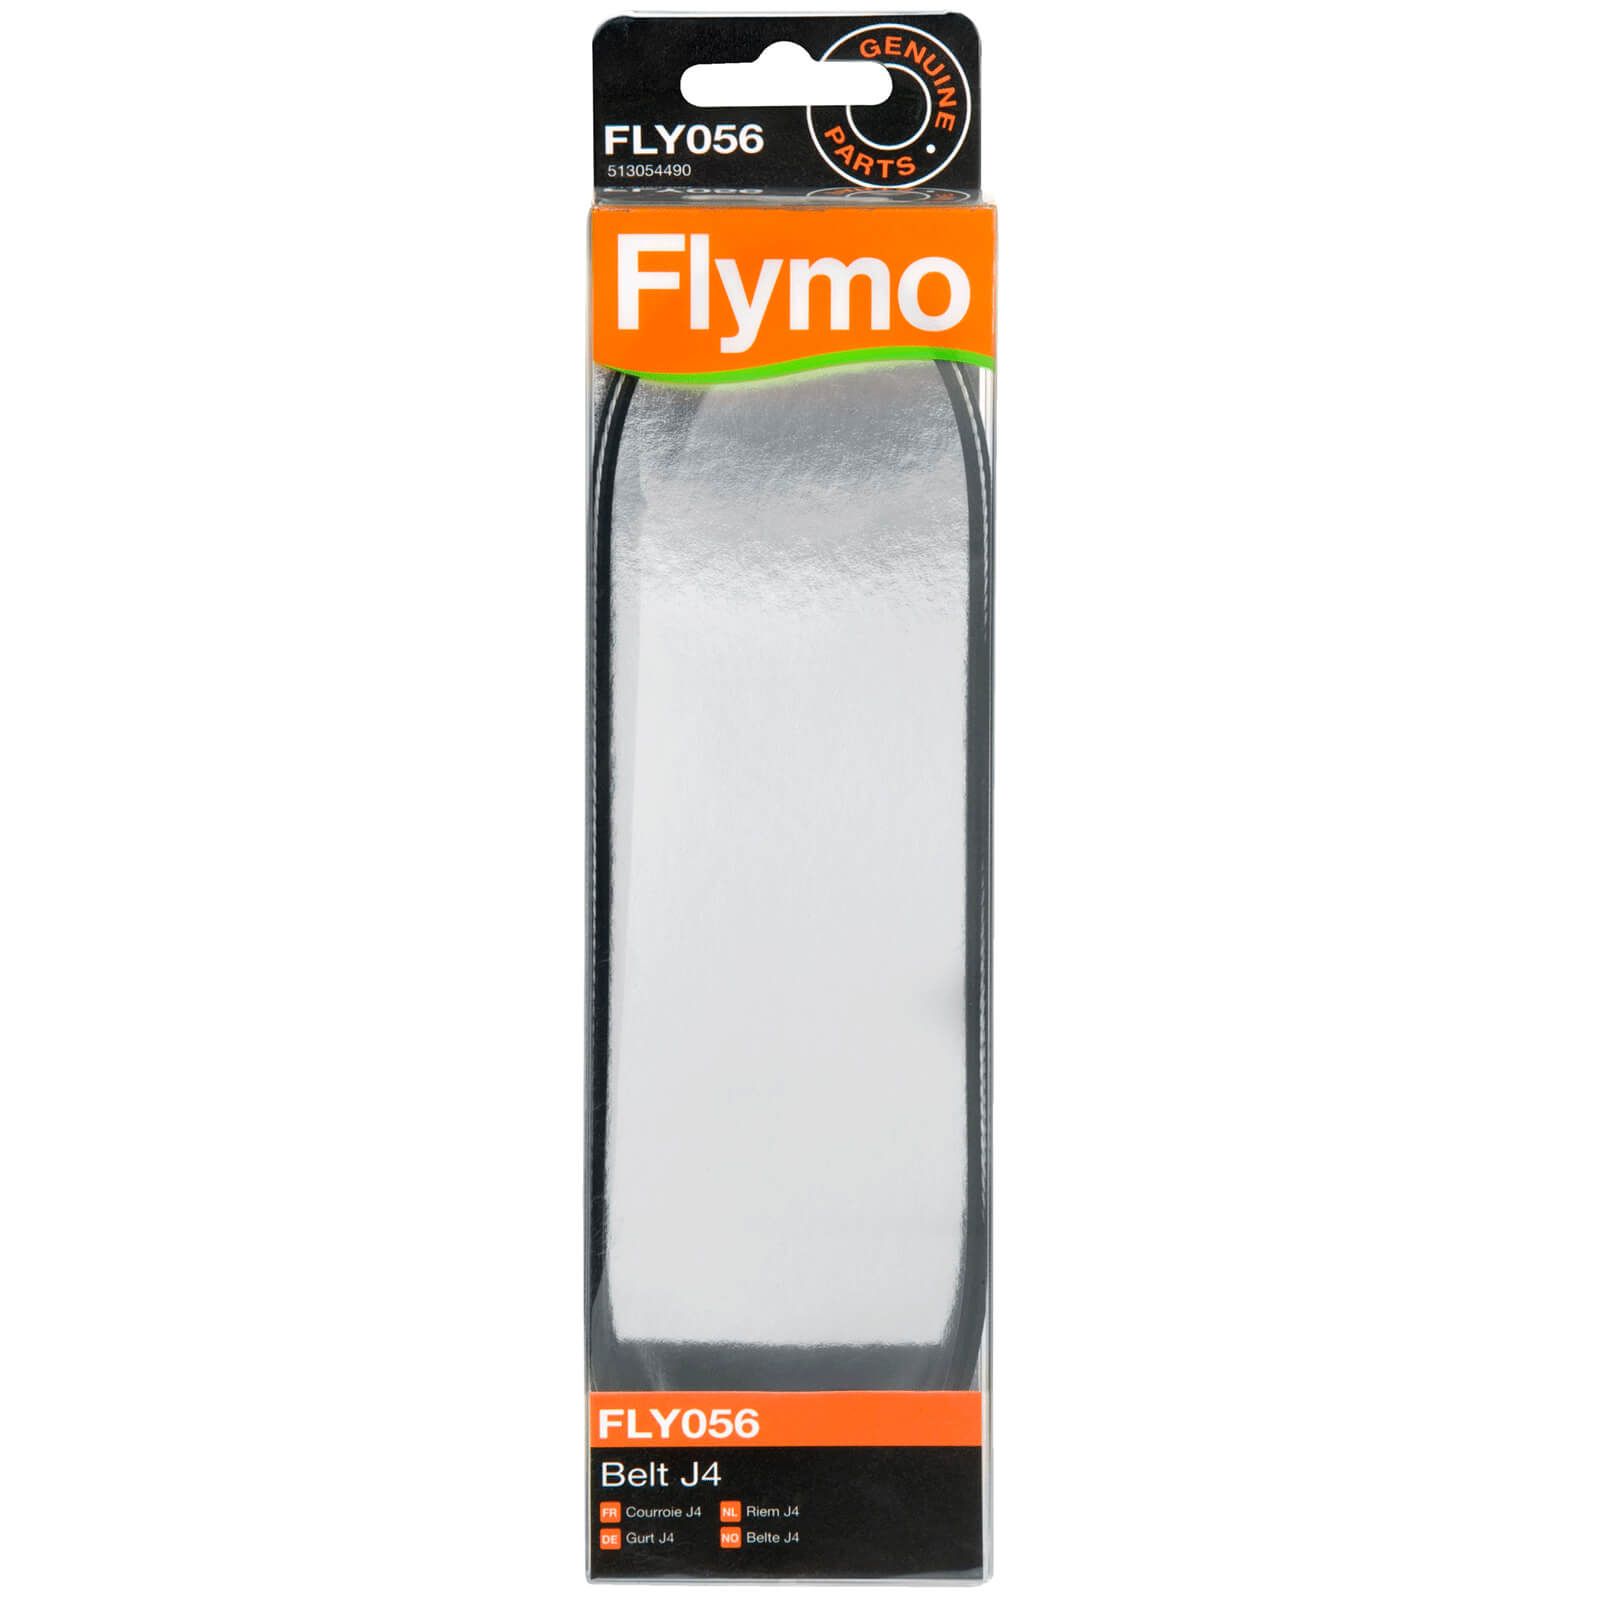 Image of Flymo FLY056 Genuine Drive Belt J4 Glide, Micro and Hover Compact Hover Mowers Pack of 1